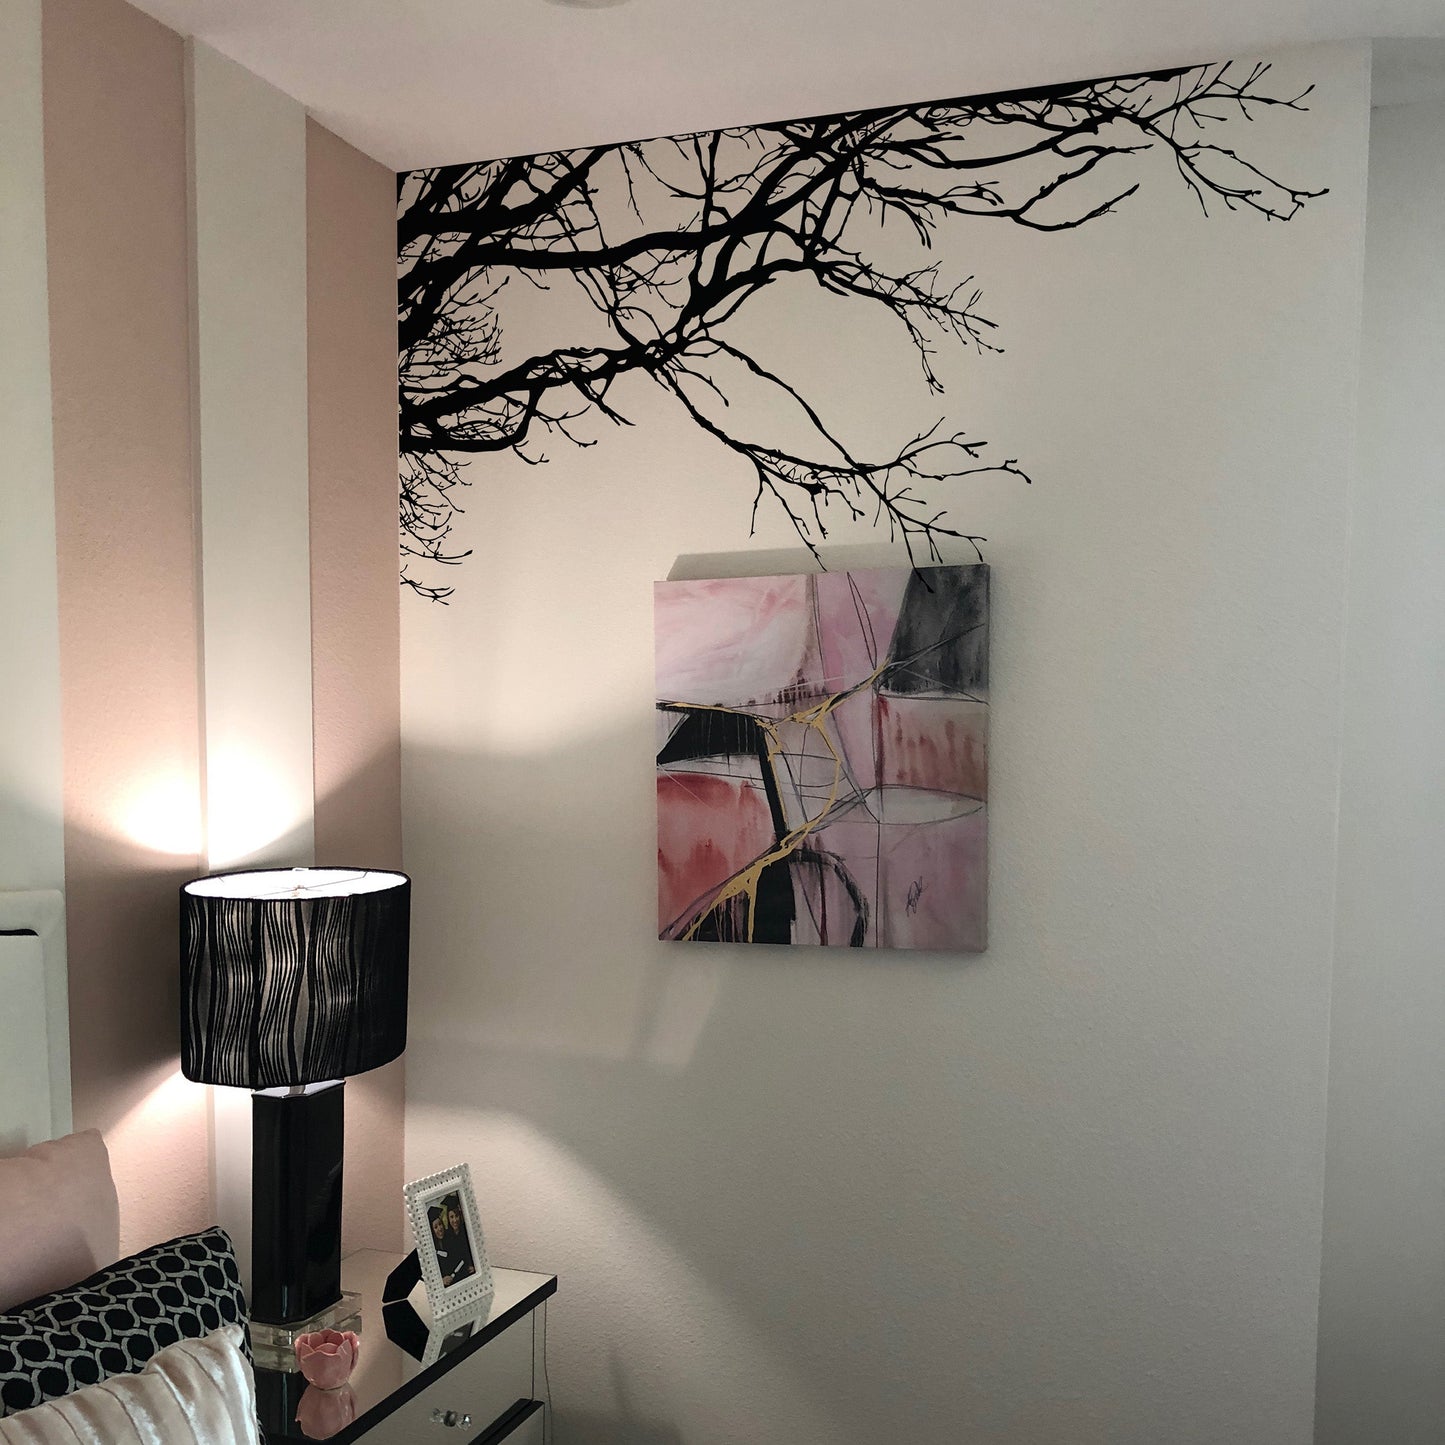 Tree Top Branches Wall Decal. Corner Edge Application Decor.  #444